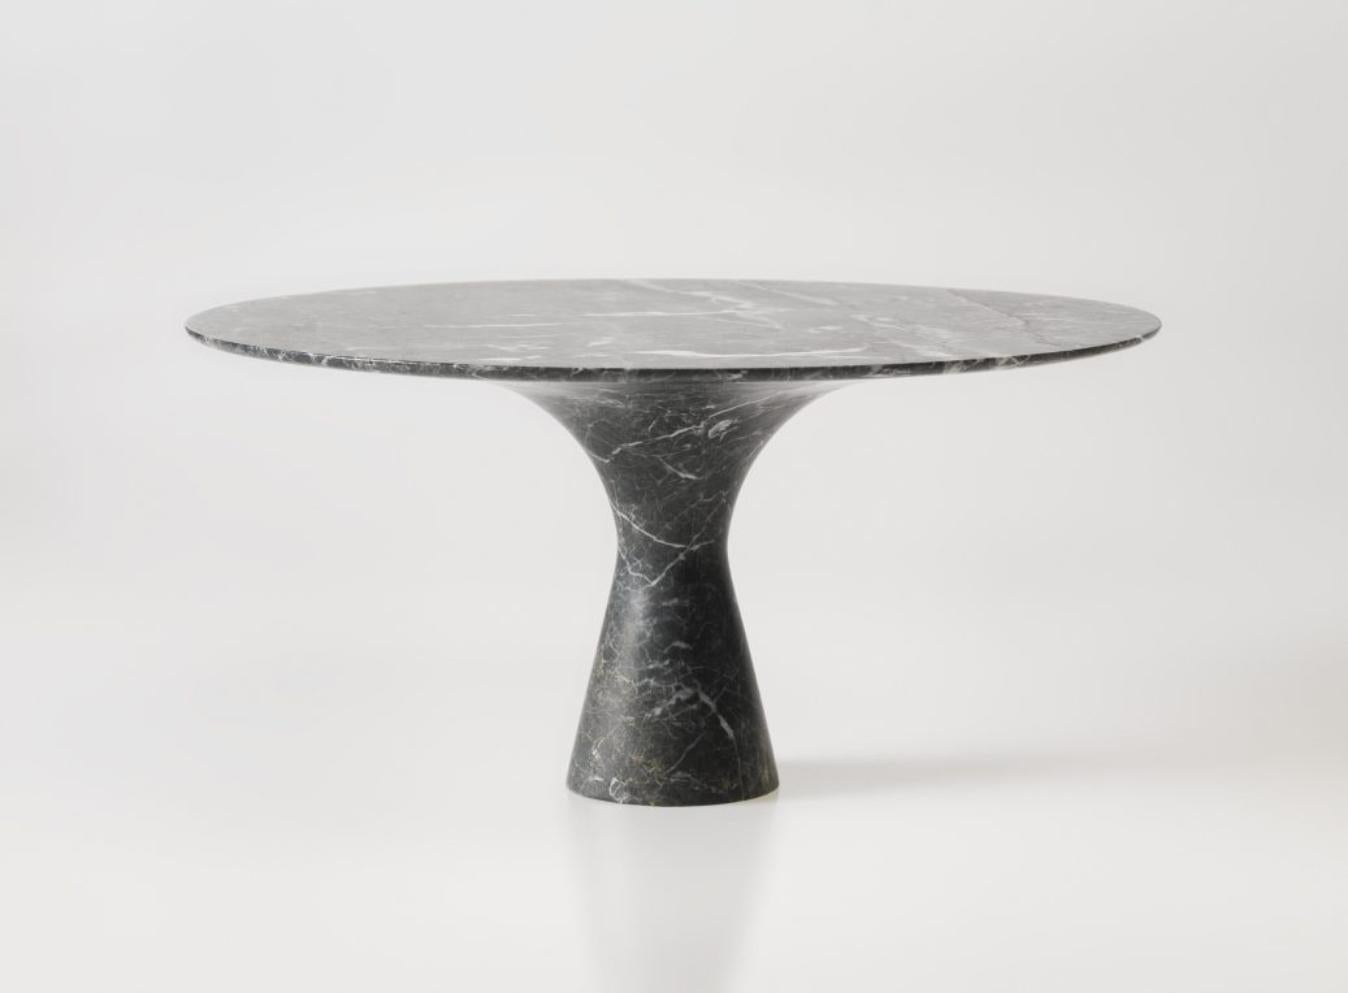 Post-Modern Port Saint Laurent Refined Contemporary Marble Dining Table 180/75